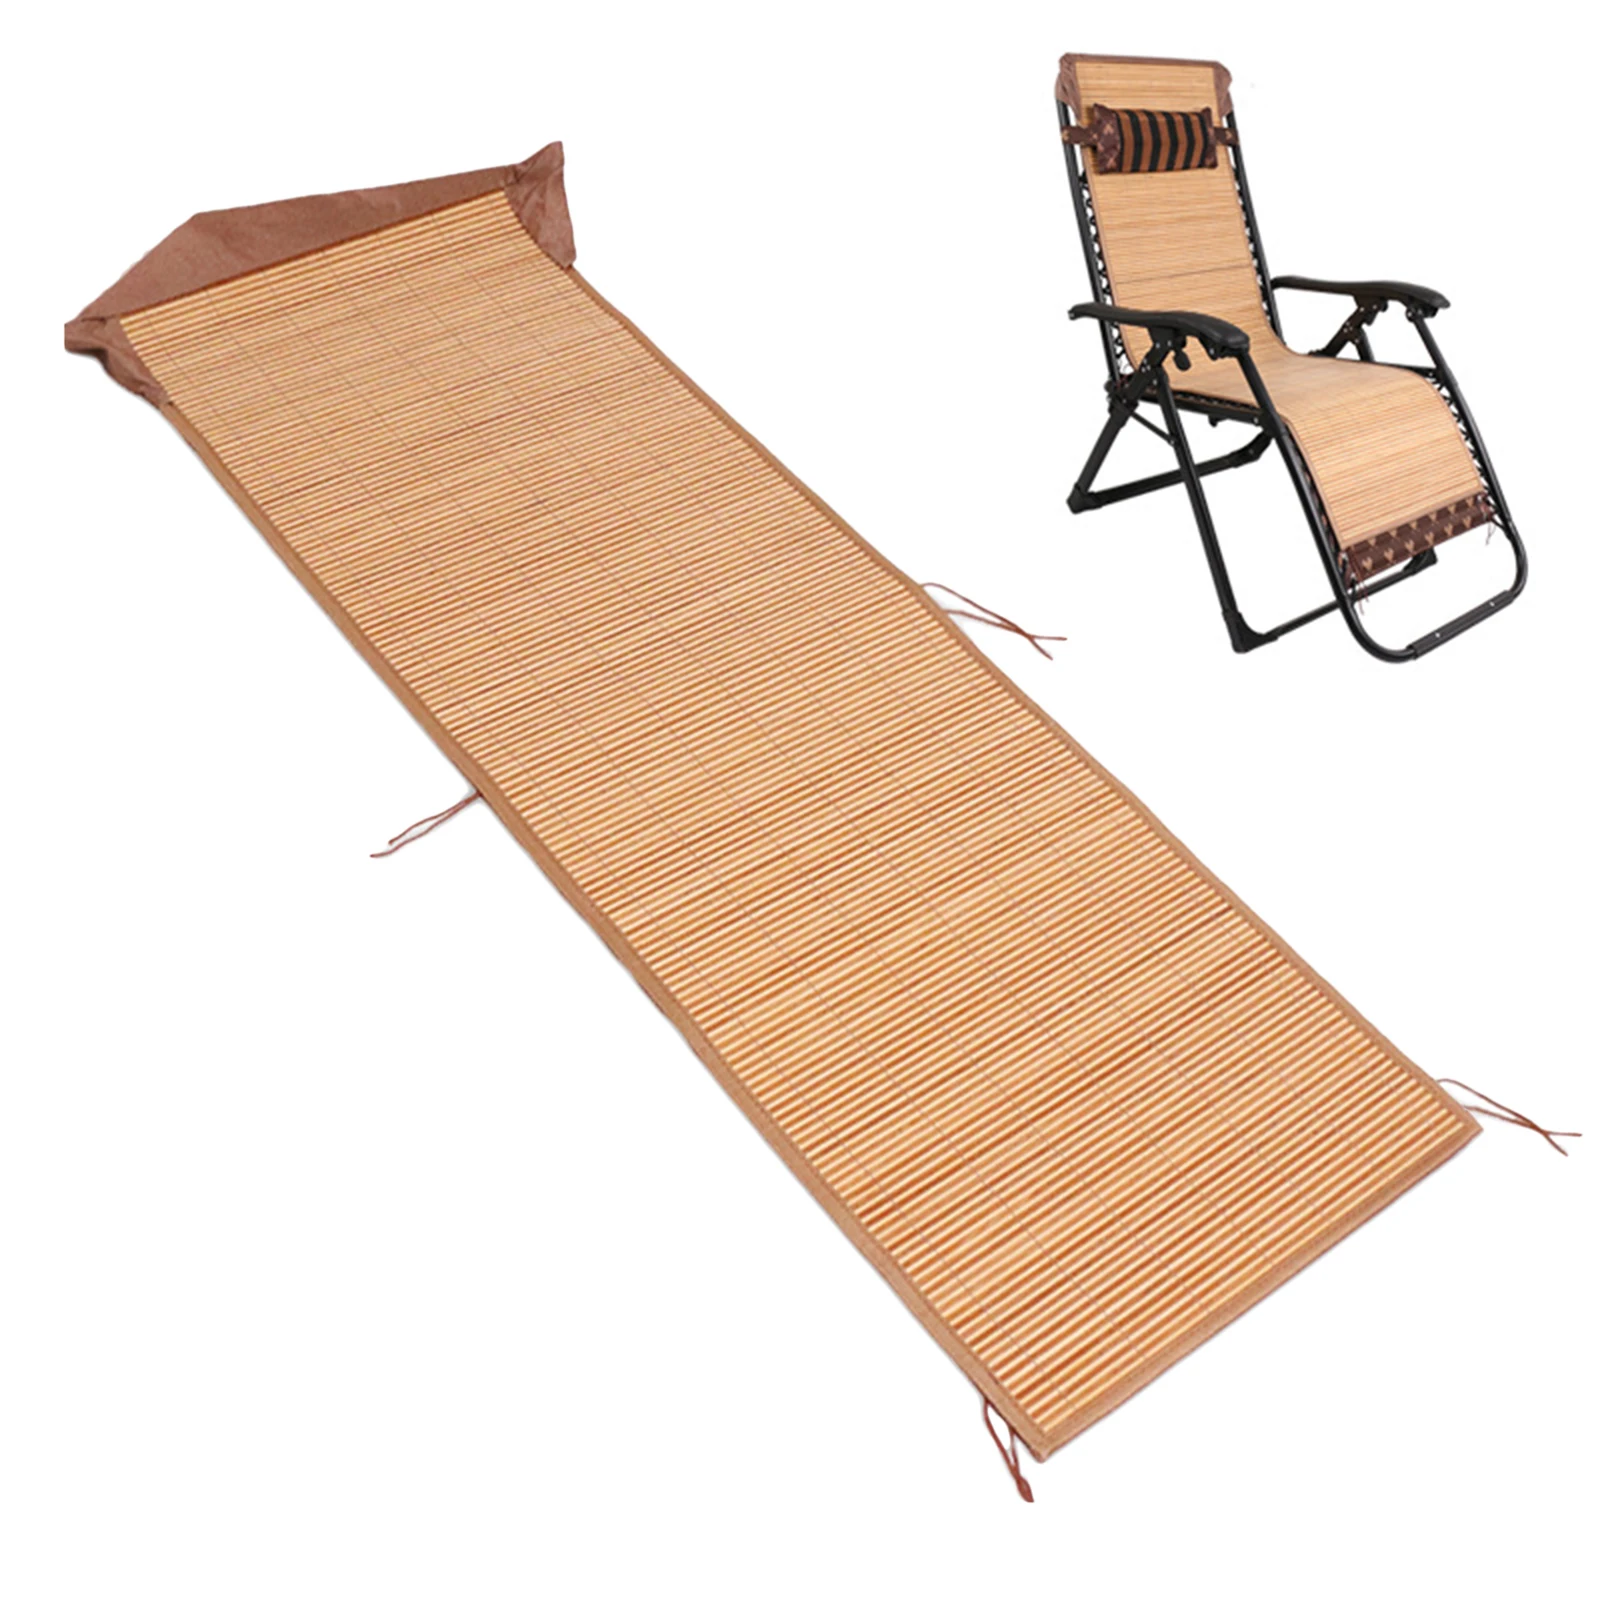 Universal Insulation Replacement Bamboo Mat Cover for Recliners Backyard Beach Pool Lounge Chair